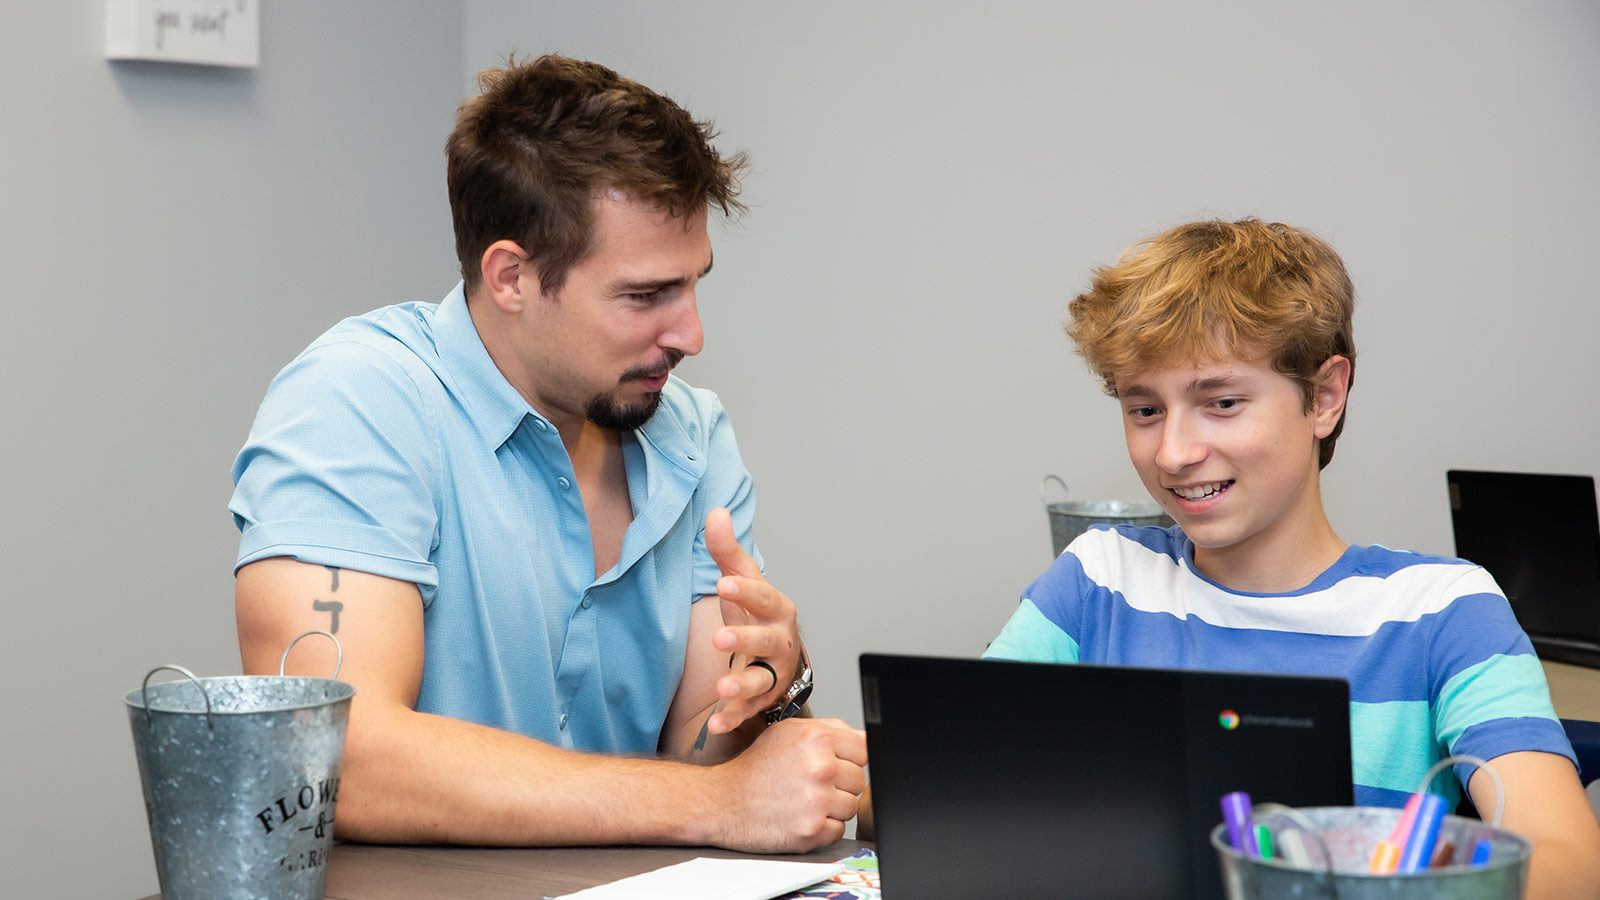 A man and teenage boy engaging in a one-on-one conversation across a desk with a laptop.